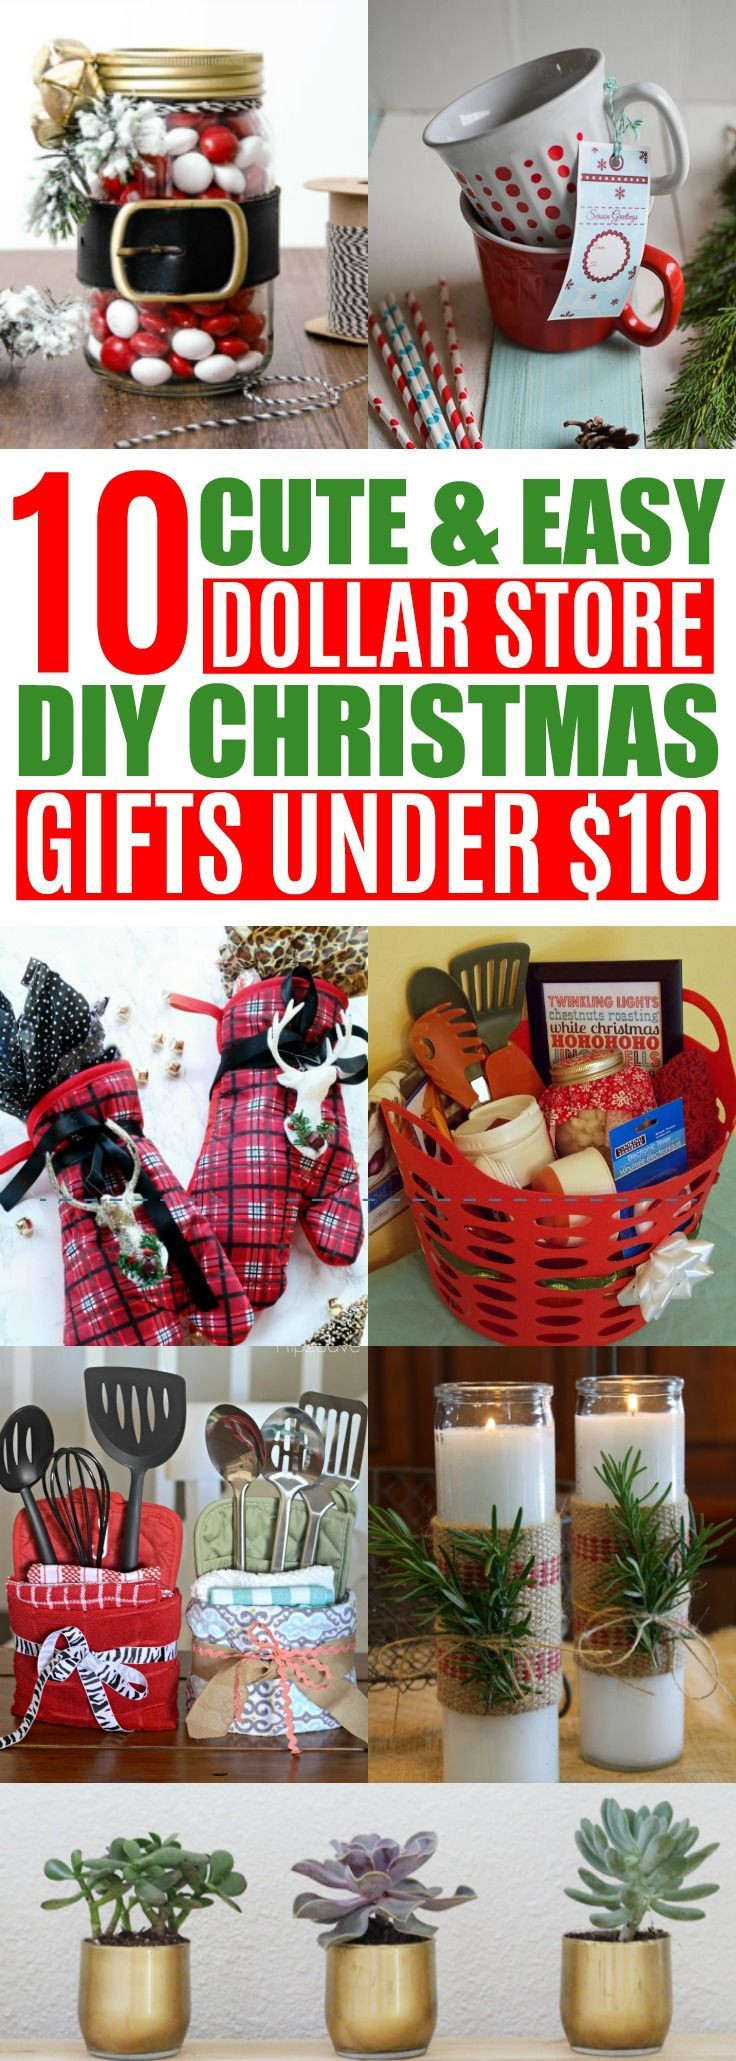 Christmas Gift Ideas Under $10
 10 DIY Cheap Christmas Gift Ideas From the Dollar Store